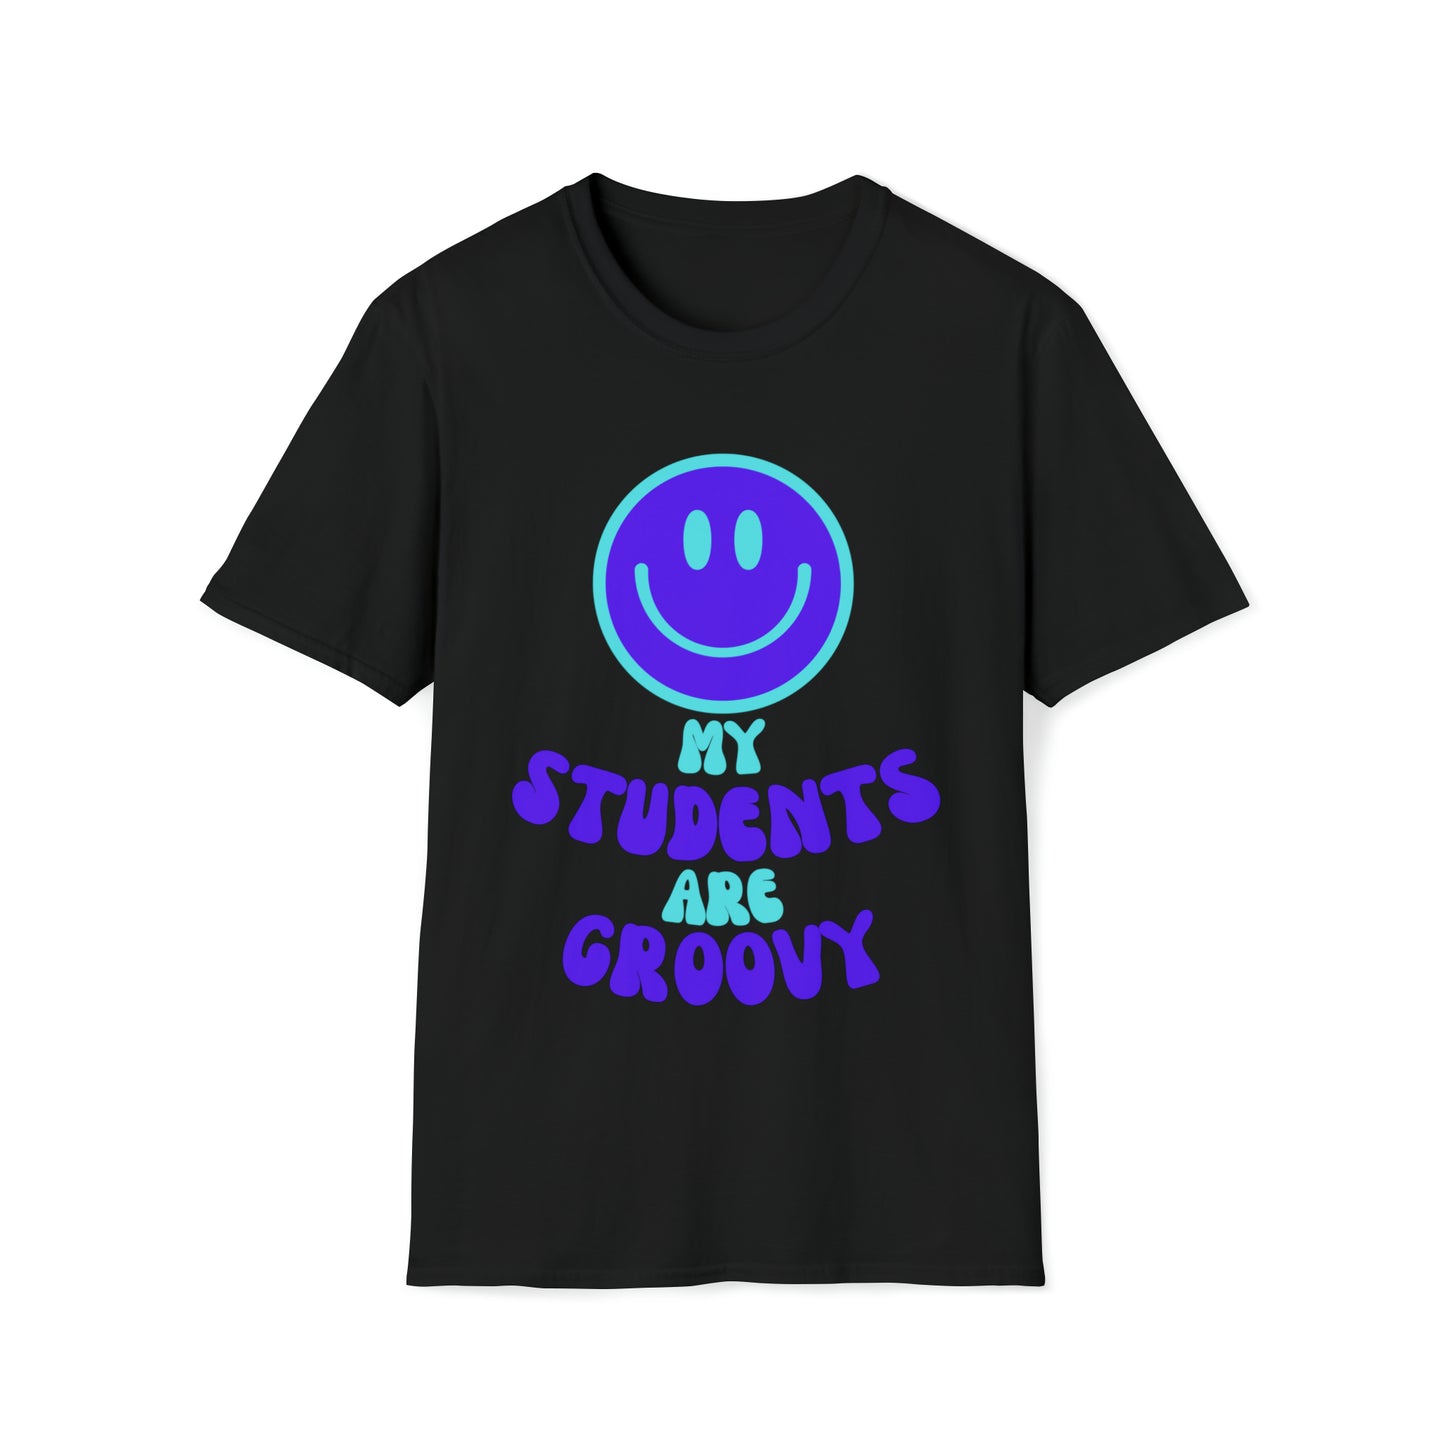 My Students are Groovy  - Adult T-Shirt